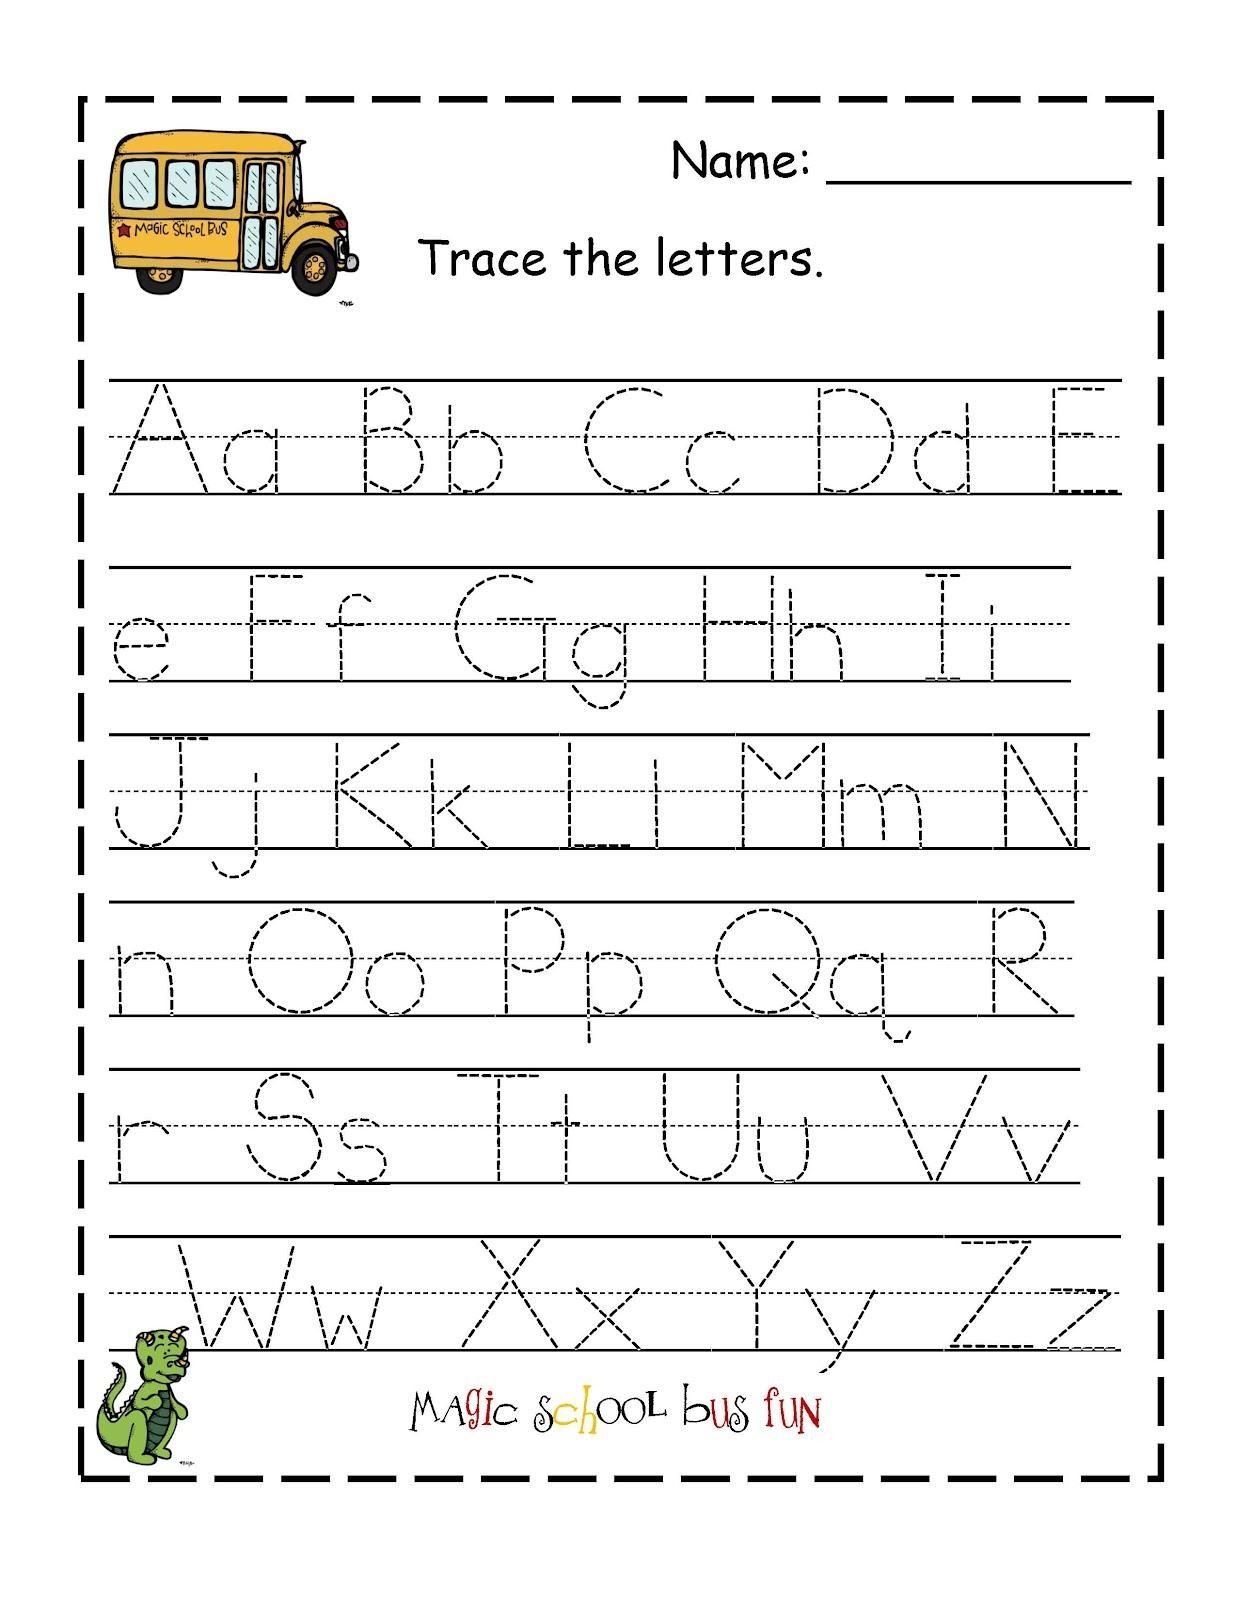 Free Printable Abc Tracing Worksheets #2 | Places To Visit - Free Printable Writing Sheets